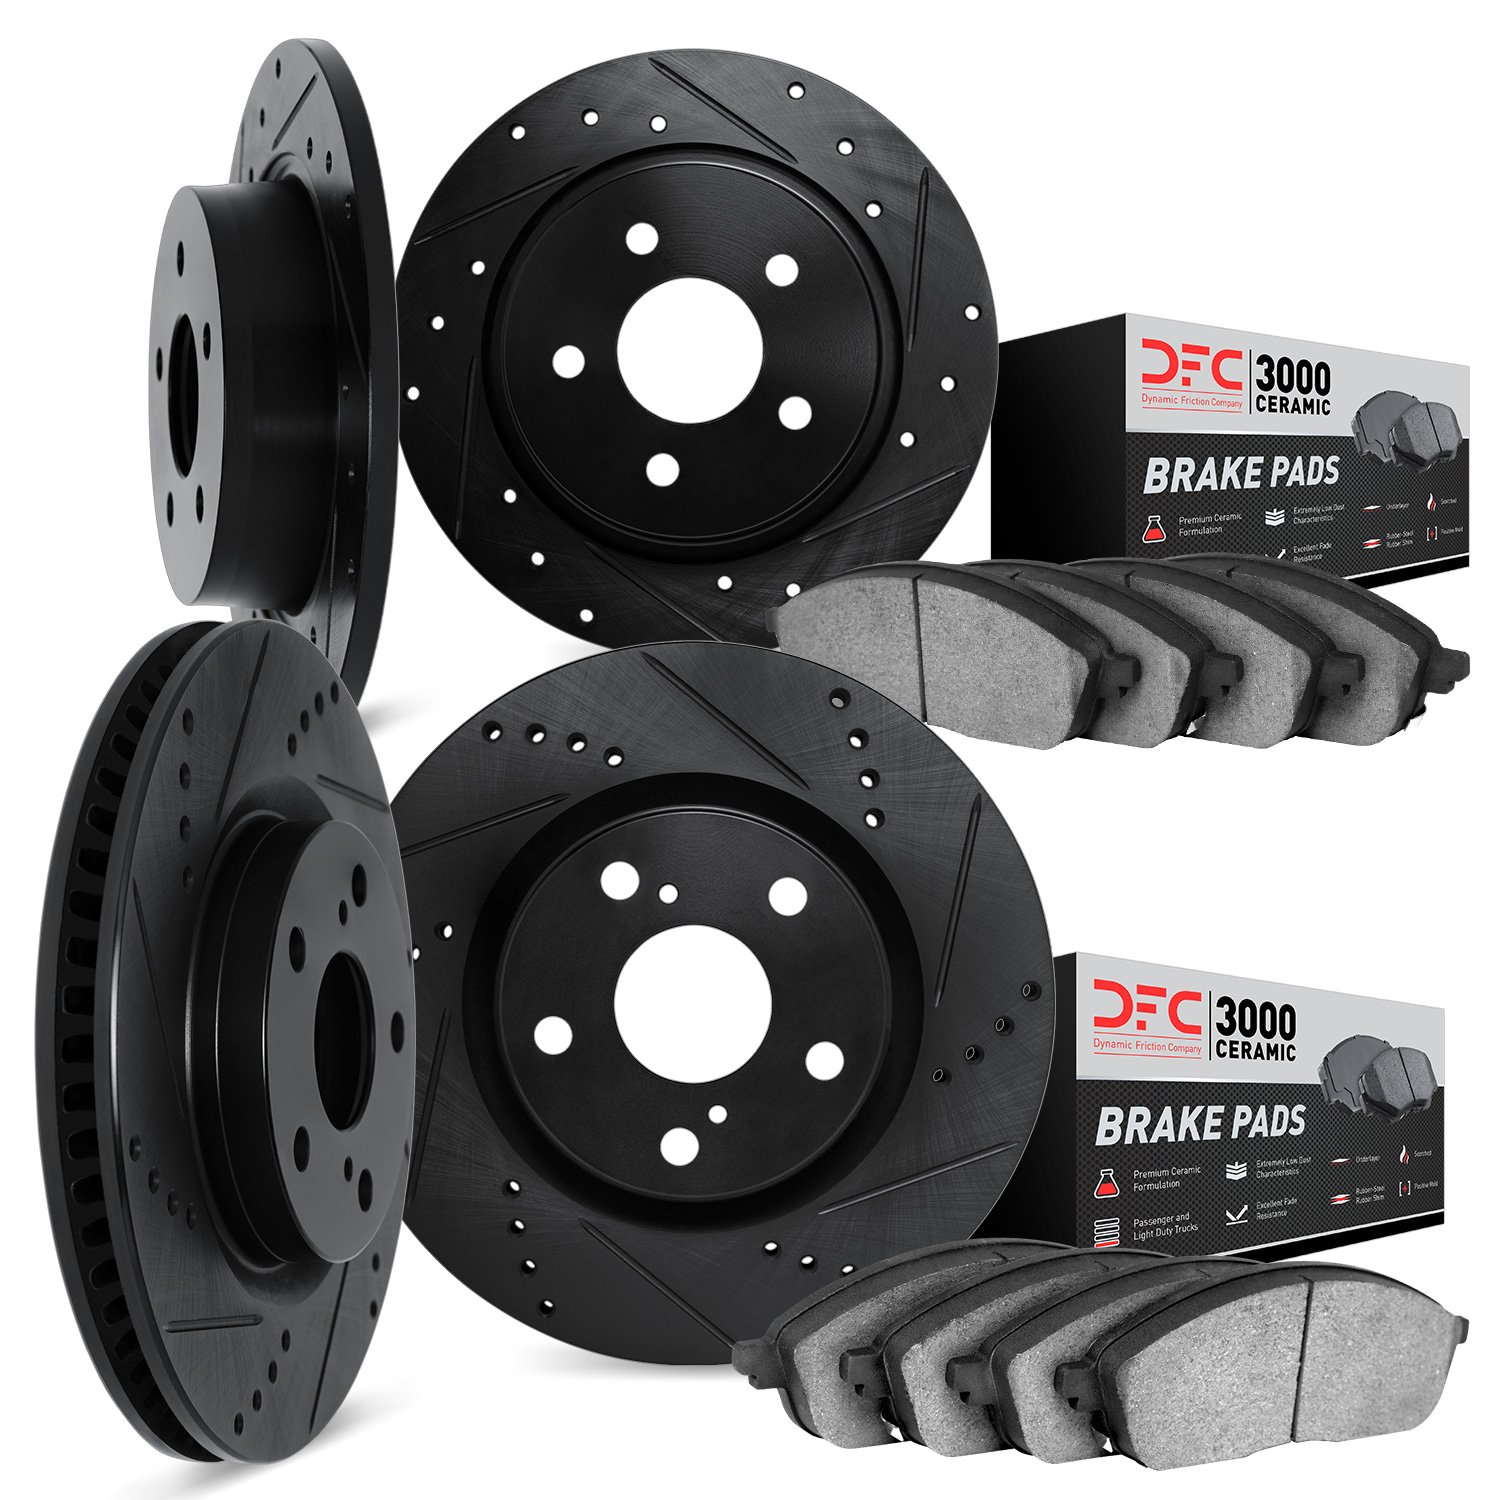 8304-13036 Drilled/Slotted Brake Rotors with 3000-Series Ceramic Brake Pads Kit [Black], 2015-2021 Subaru, Position: Front and R